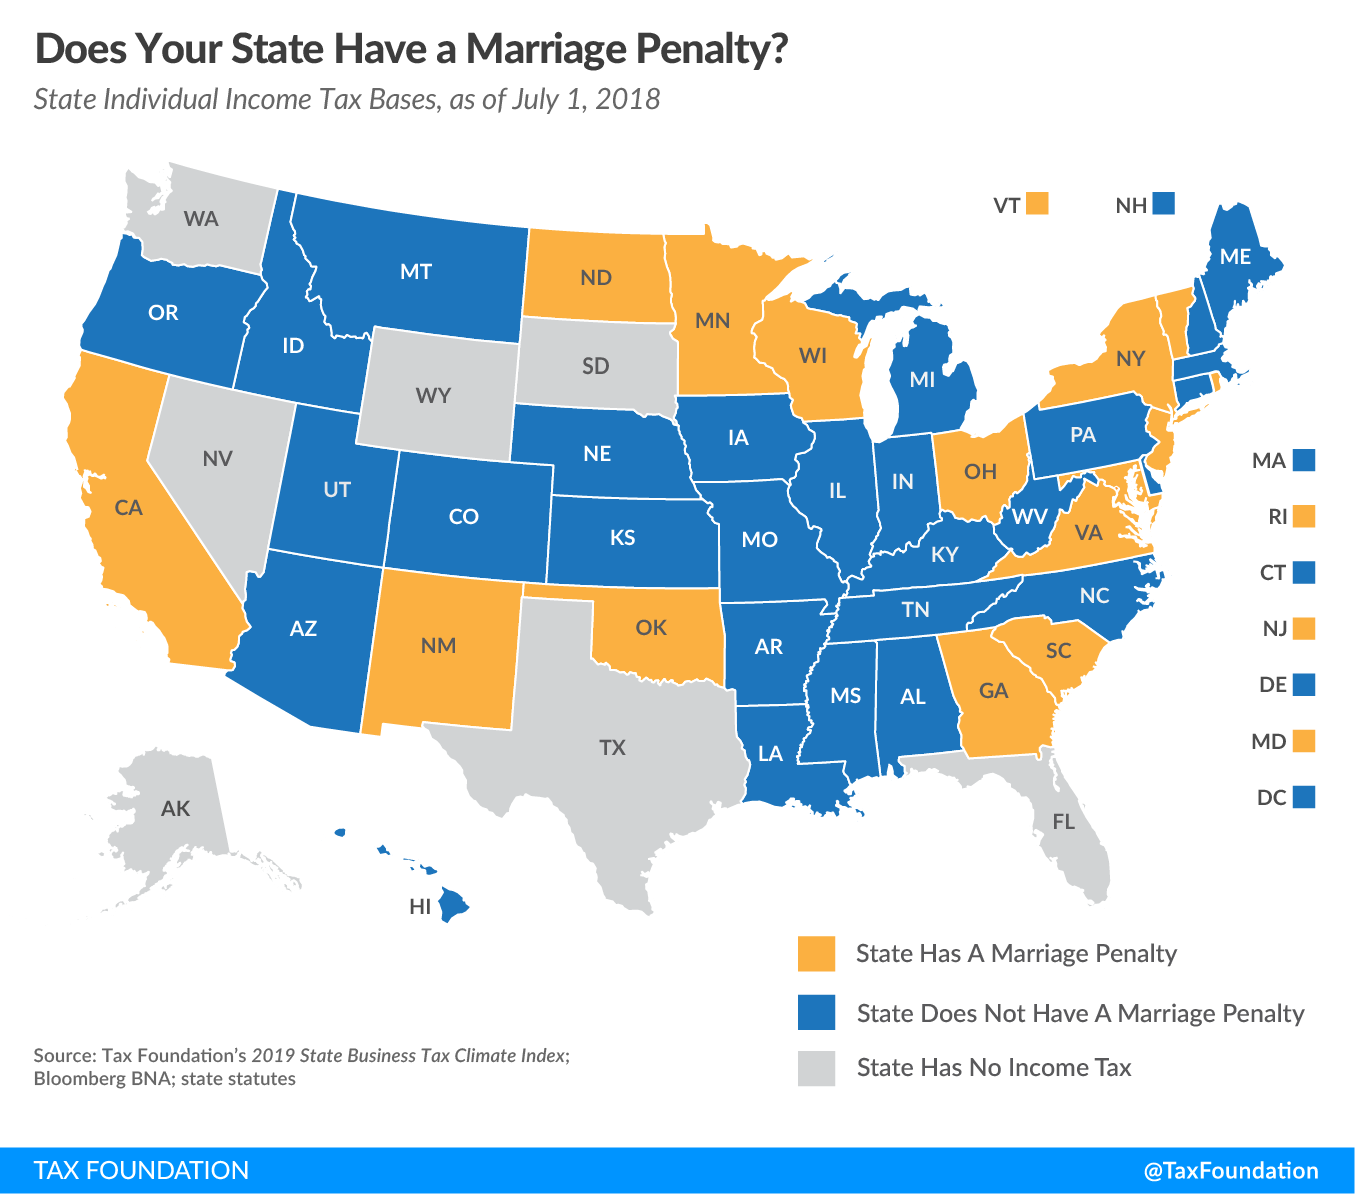 Does Your State Have a Marriage Penalty?